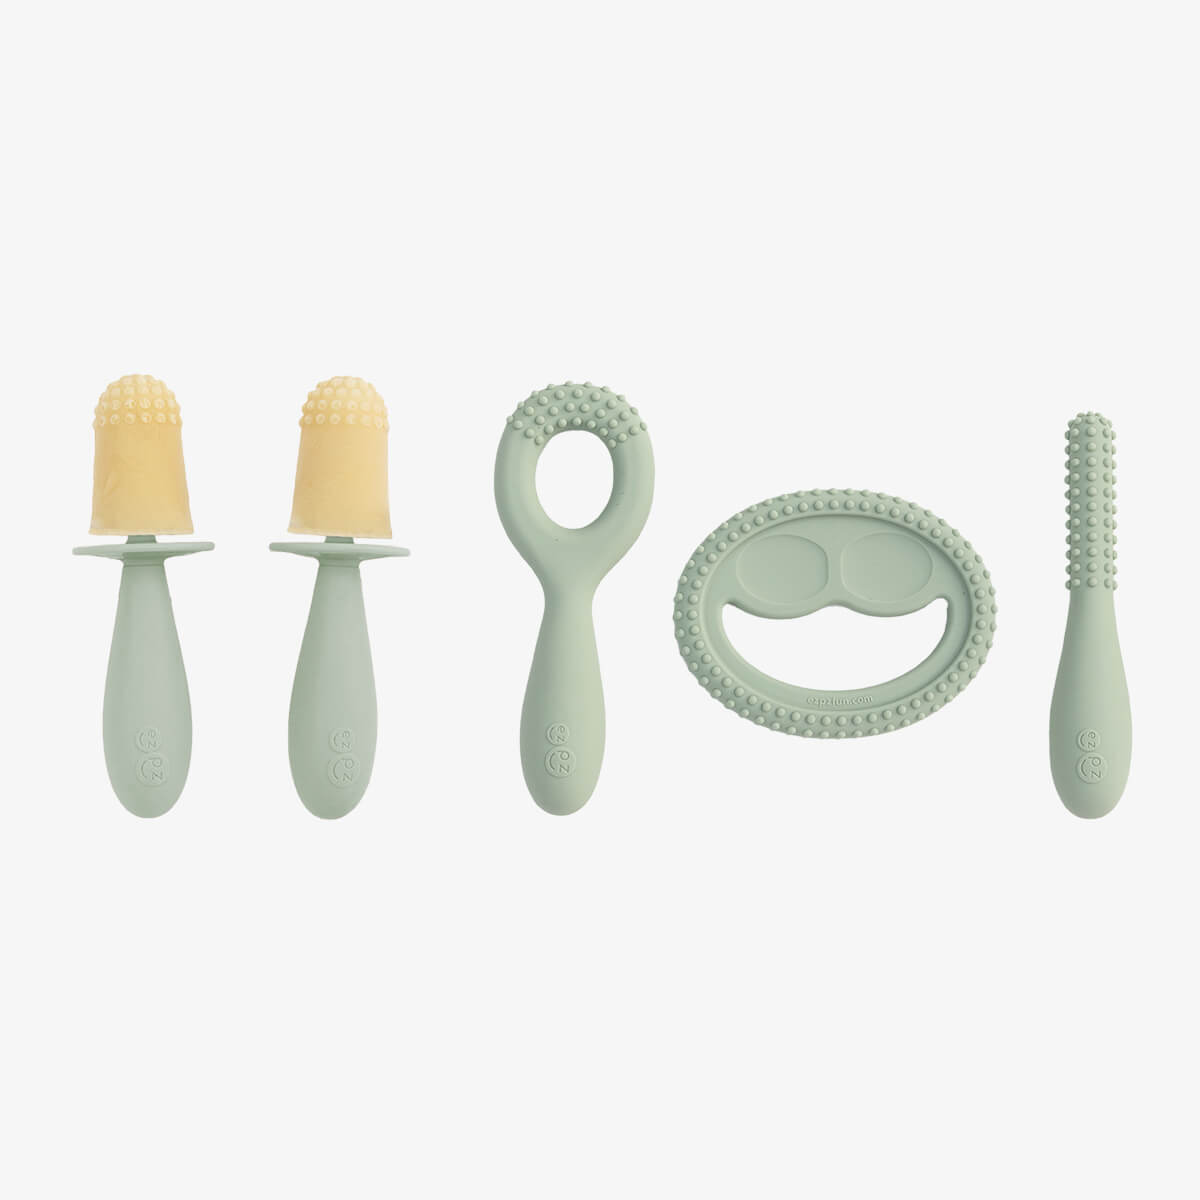 Pre-feeding set by ezpz in sage green includes the tiny pops and oral development tools (silicone teethers)